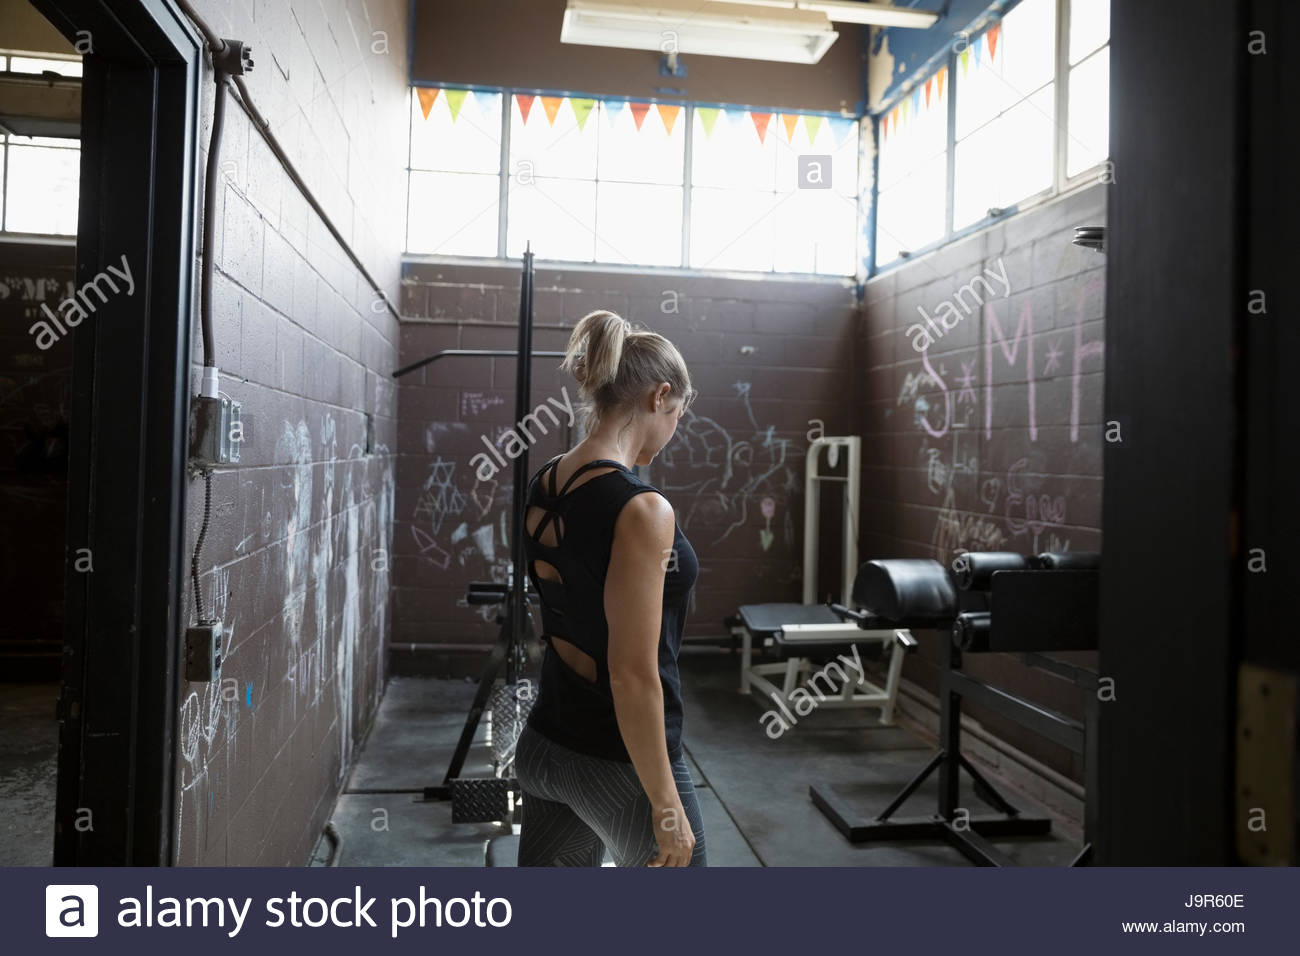 Fit woman weightlifting in gritty gym Stock Photo